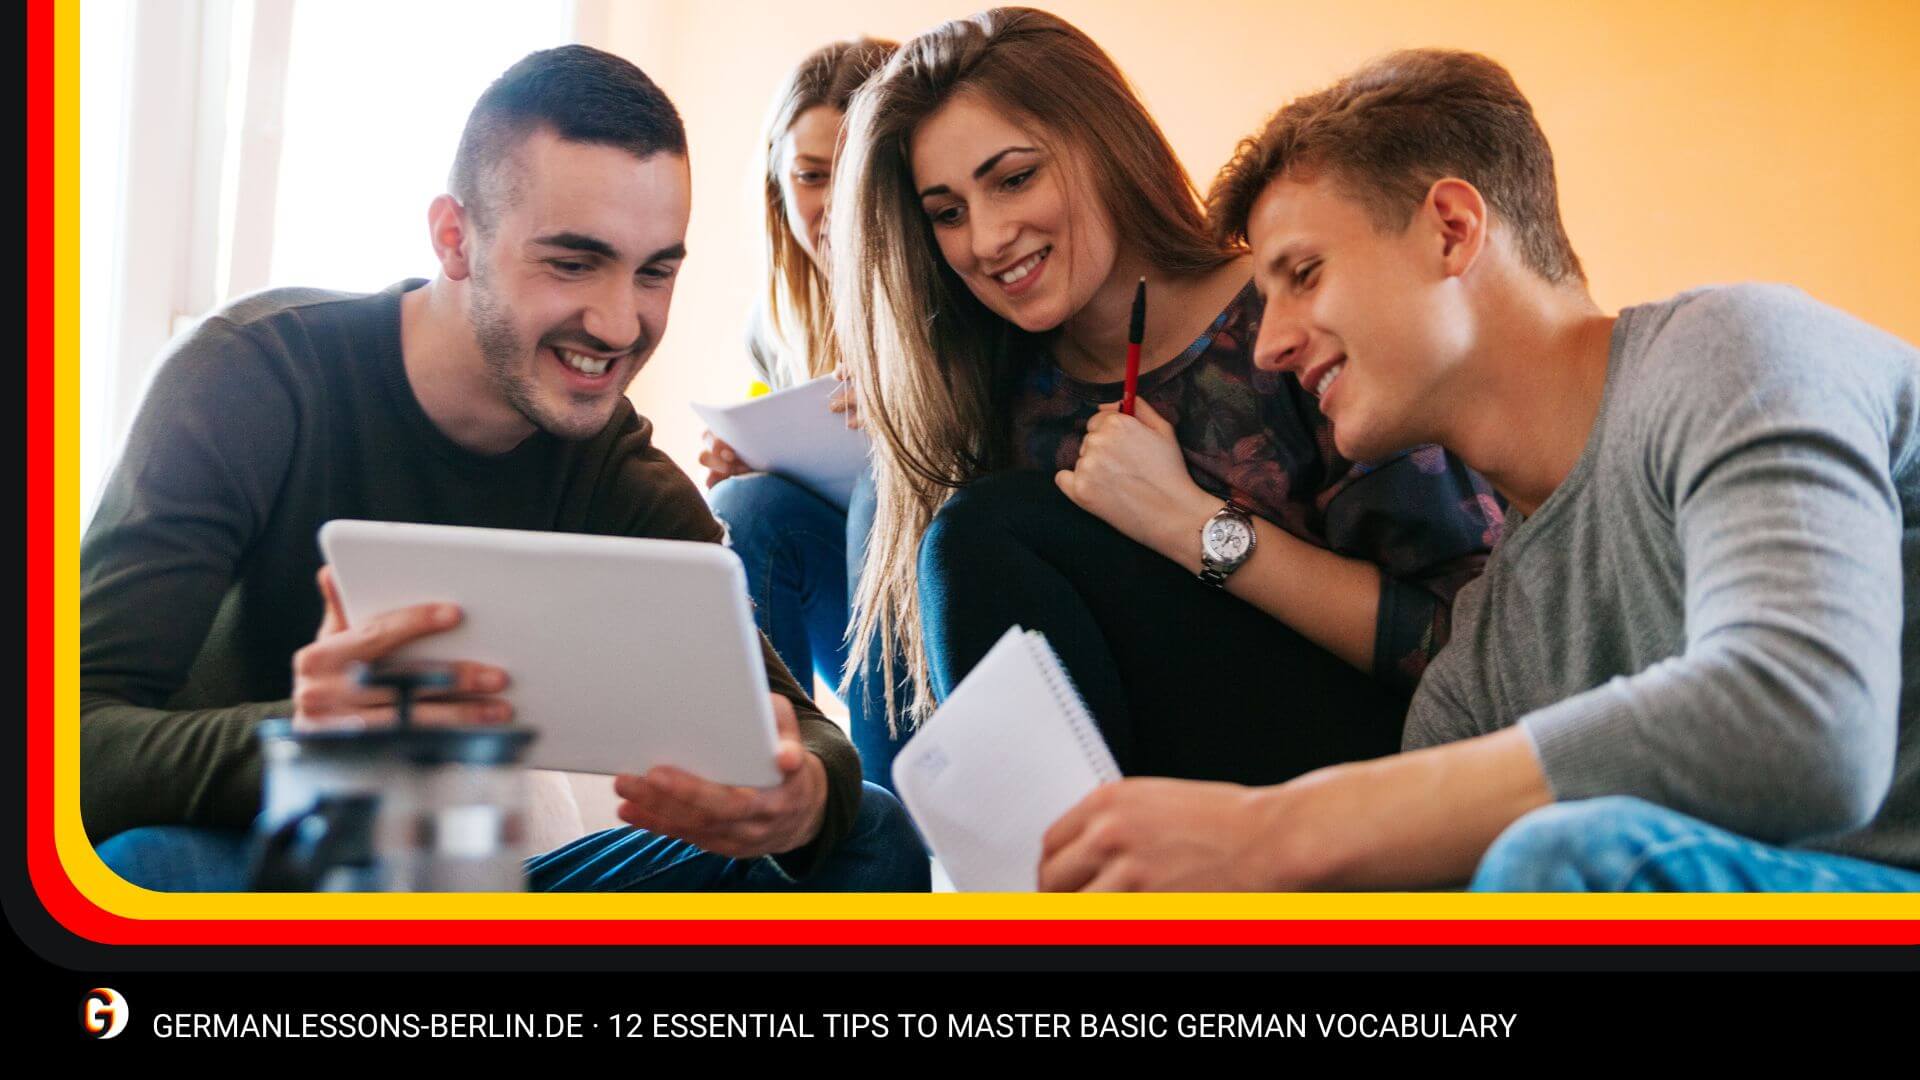 12 Essential Tips to Master Basic German Vocabulary